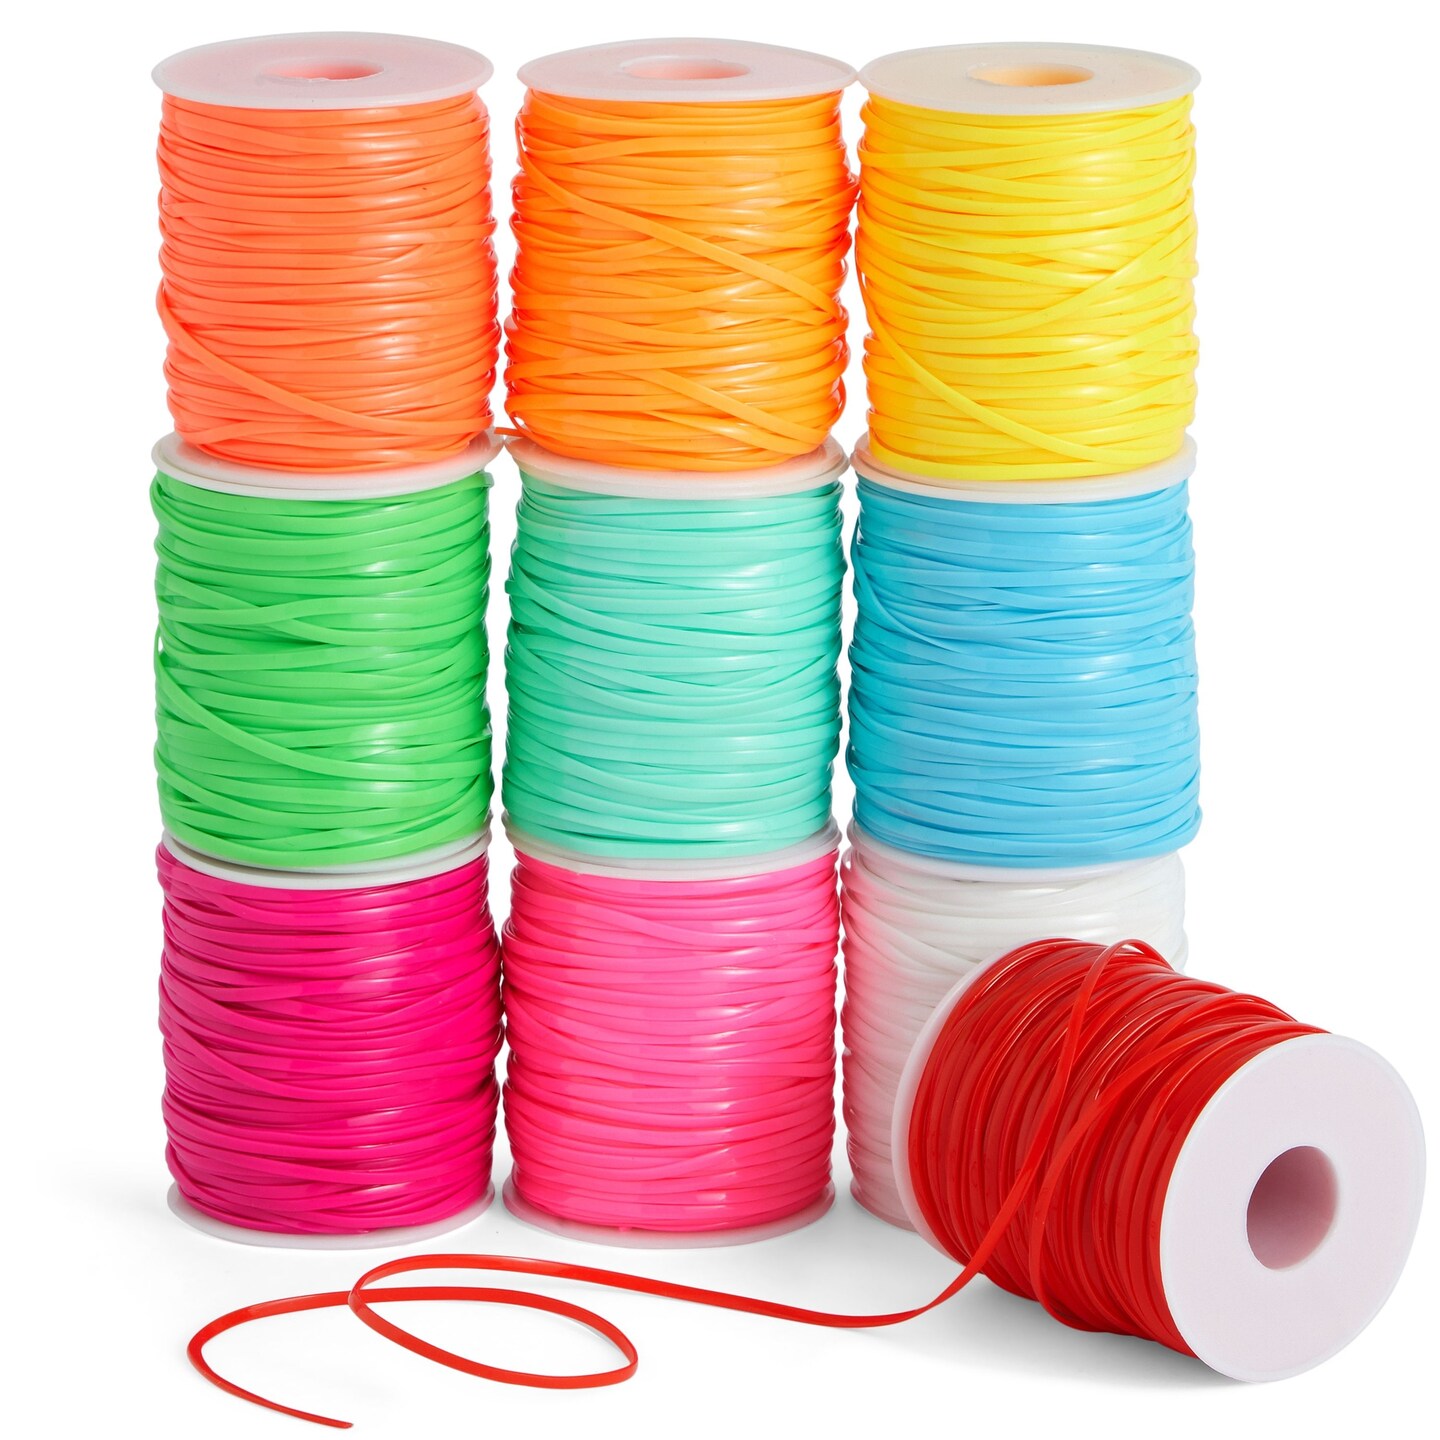 10 Spools of Plastic Gimp String in 10 Neon Colors, 50 Yards Each